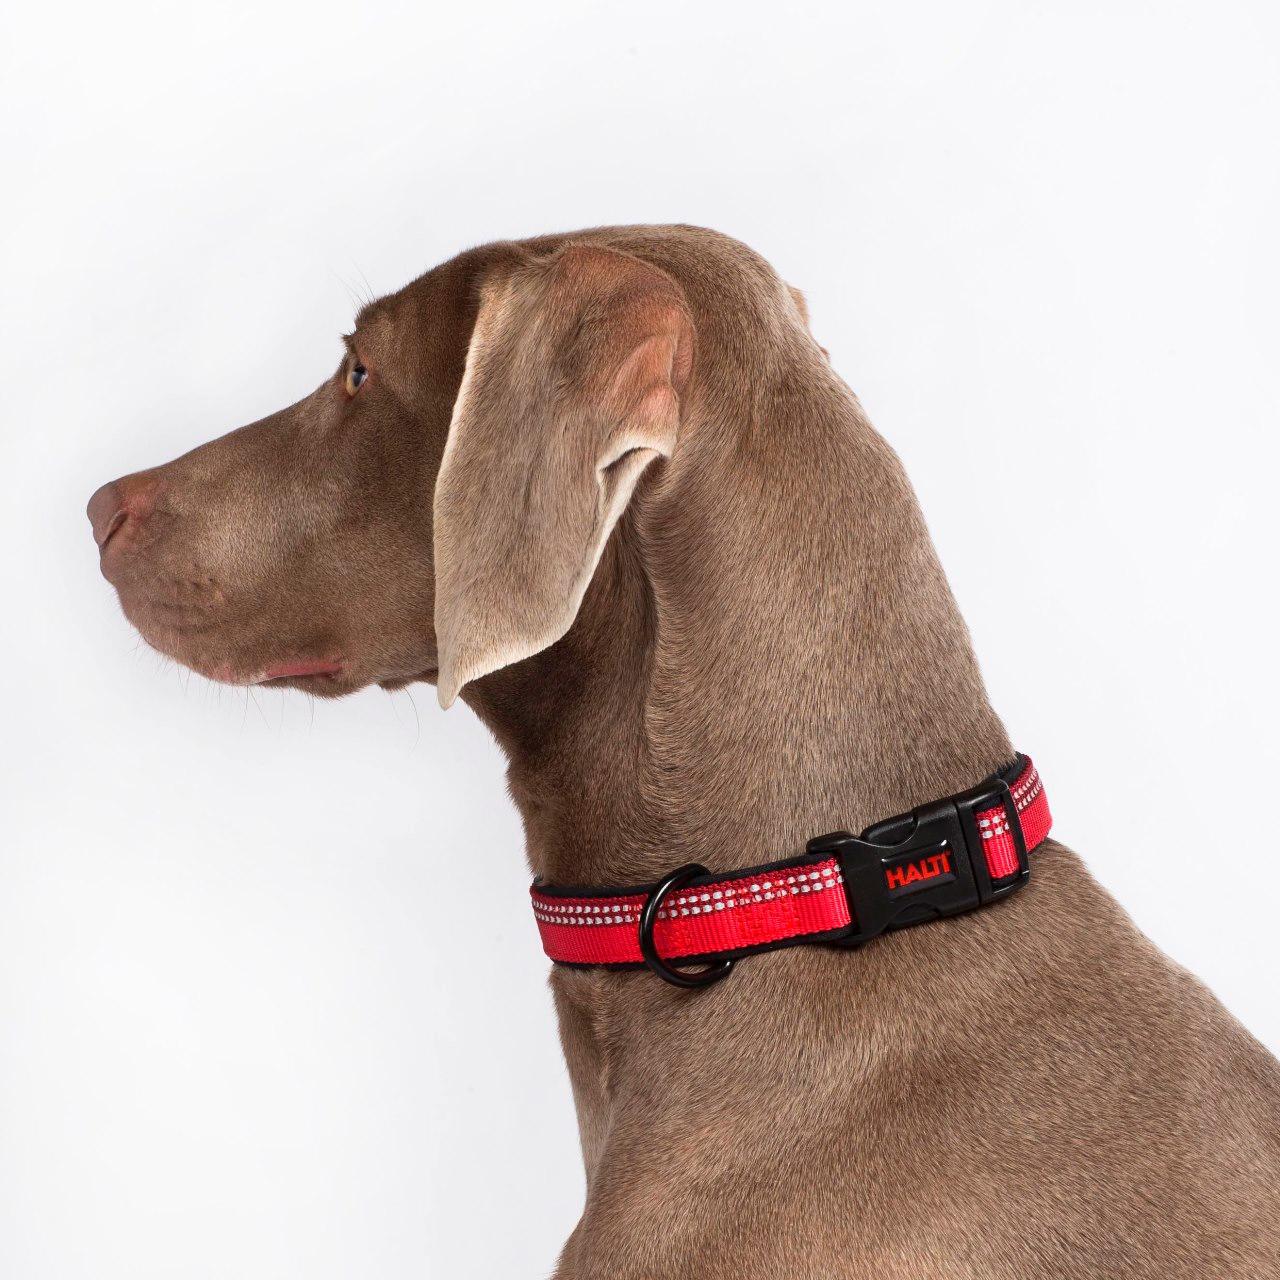 Comfort Dog Collar in Red